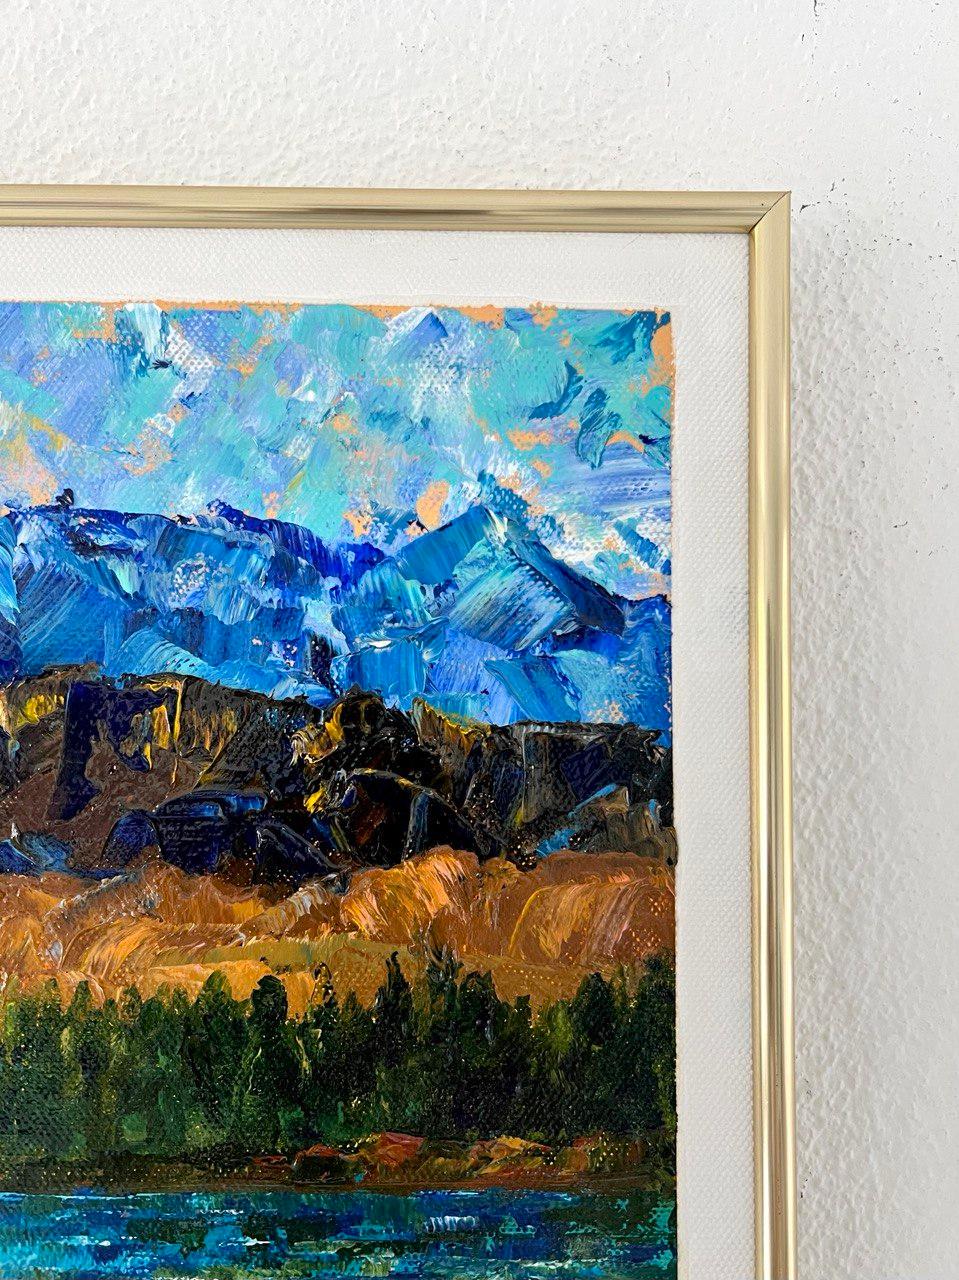              This Original impasto painting was created in the impressionism style on canvas 30/40 cm.                                 
The artwork was painted in the open air while traveling in Italy - in Vinci, the birthplace of Leonardo Da